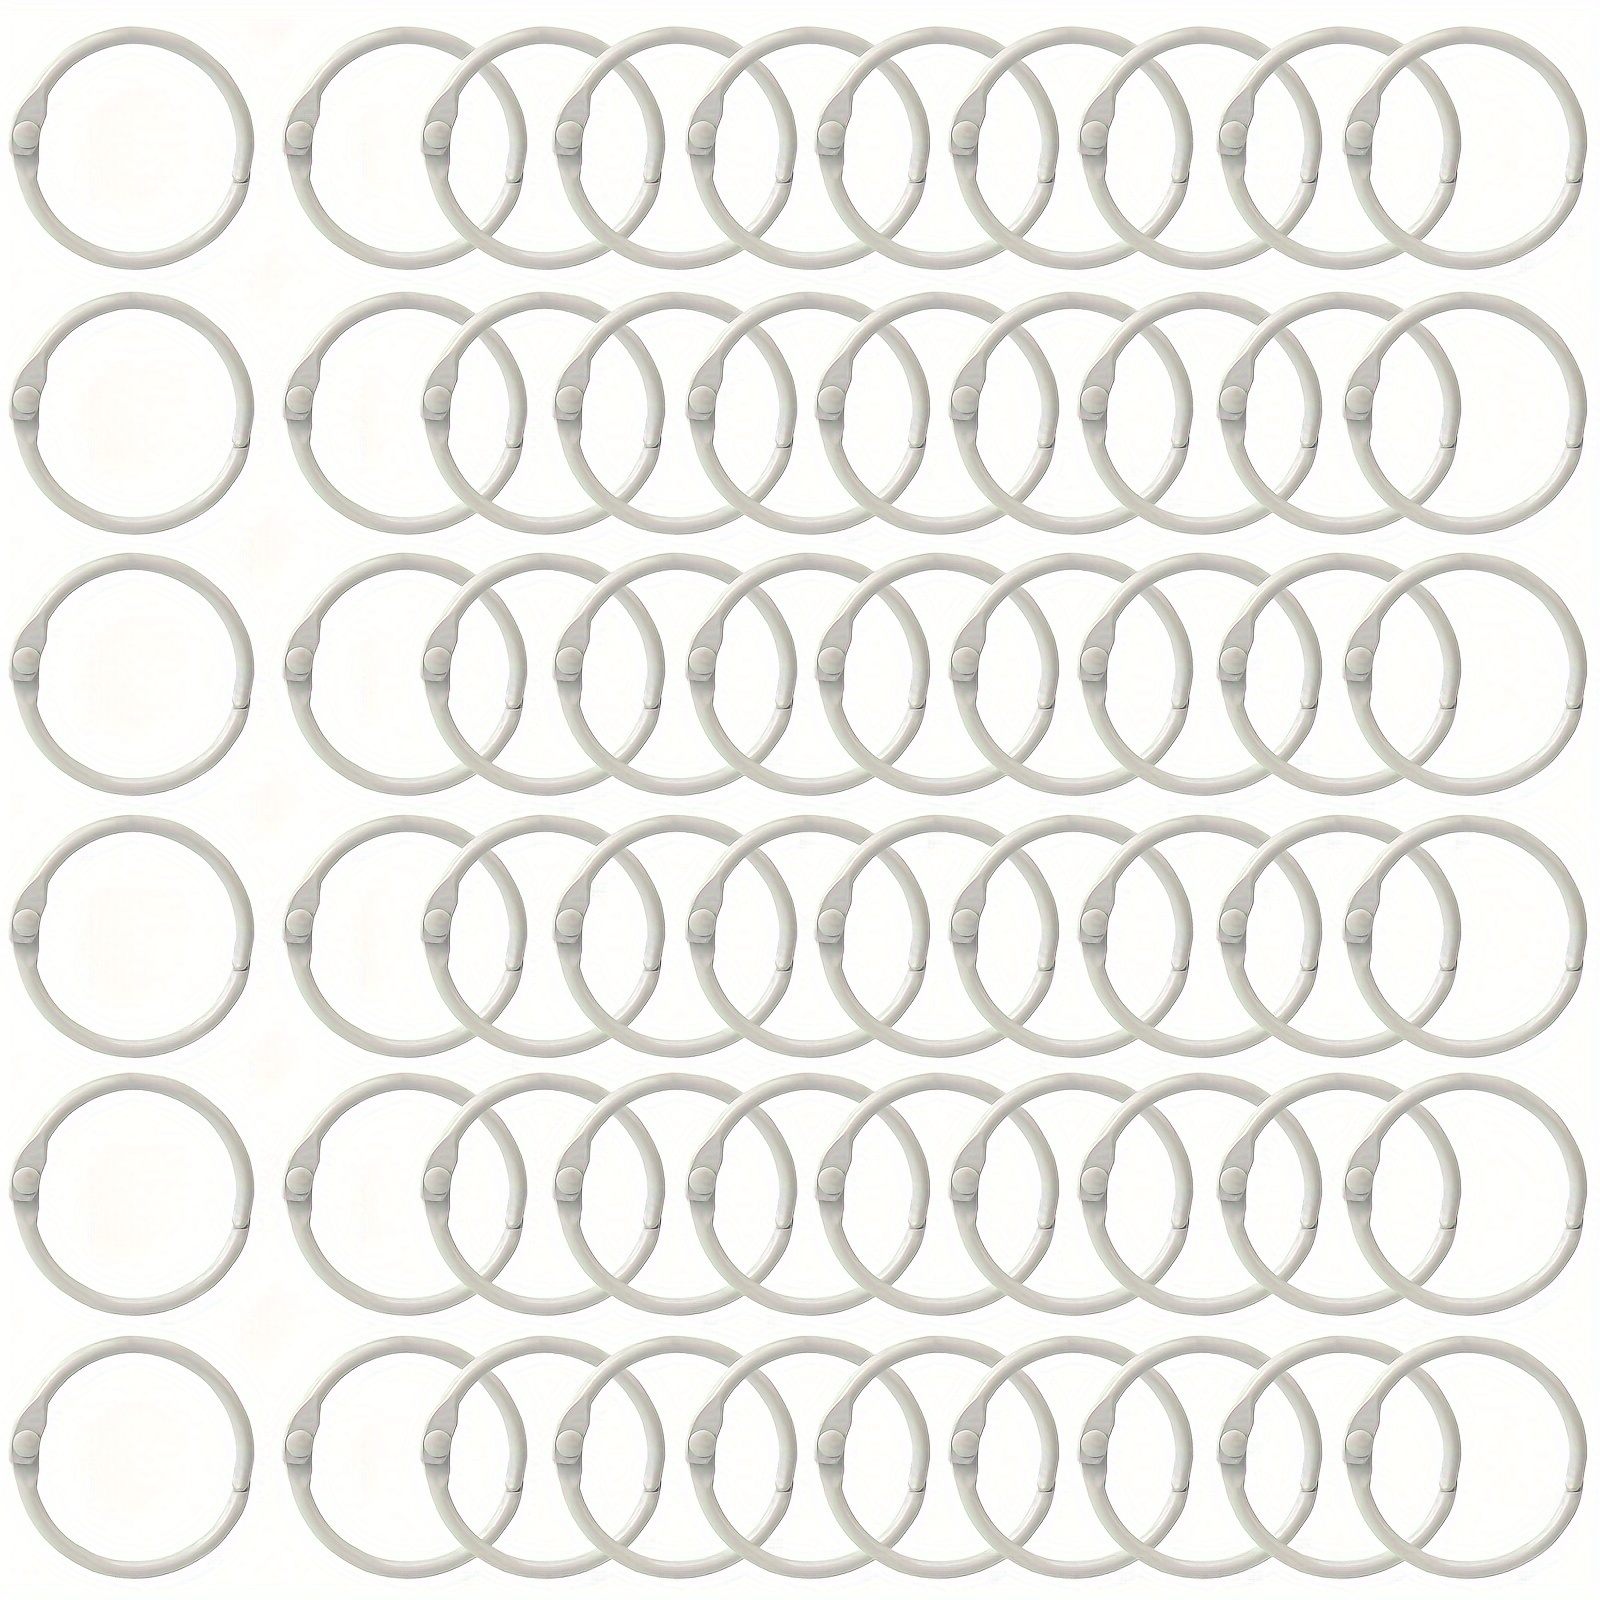  20 PCS Loose Leaf Binder Rings, NEWEST Small Binder Rings 1/2  Inch Plastic Book Binder Ring Paper Ring Strips Snap Split Binding Comb  Spines Office Book Ring for Notebook, Diary